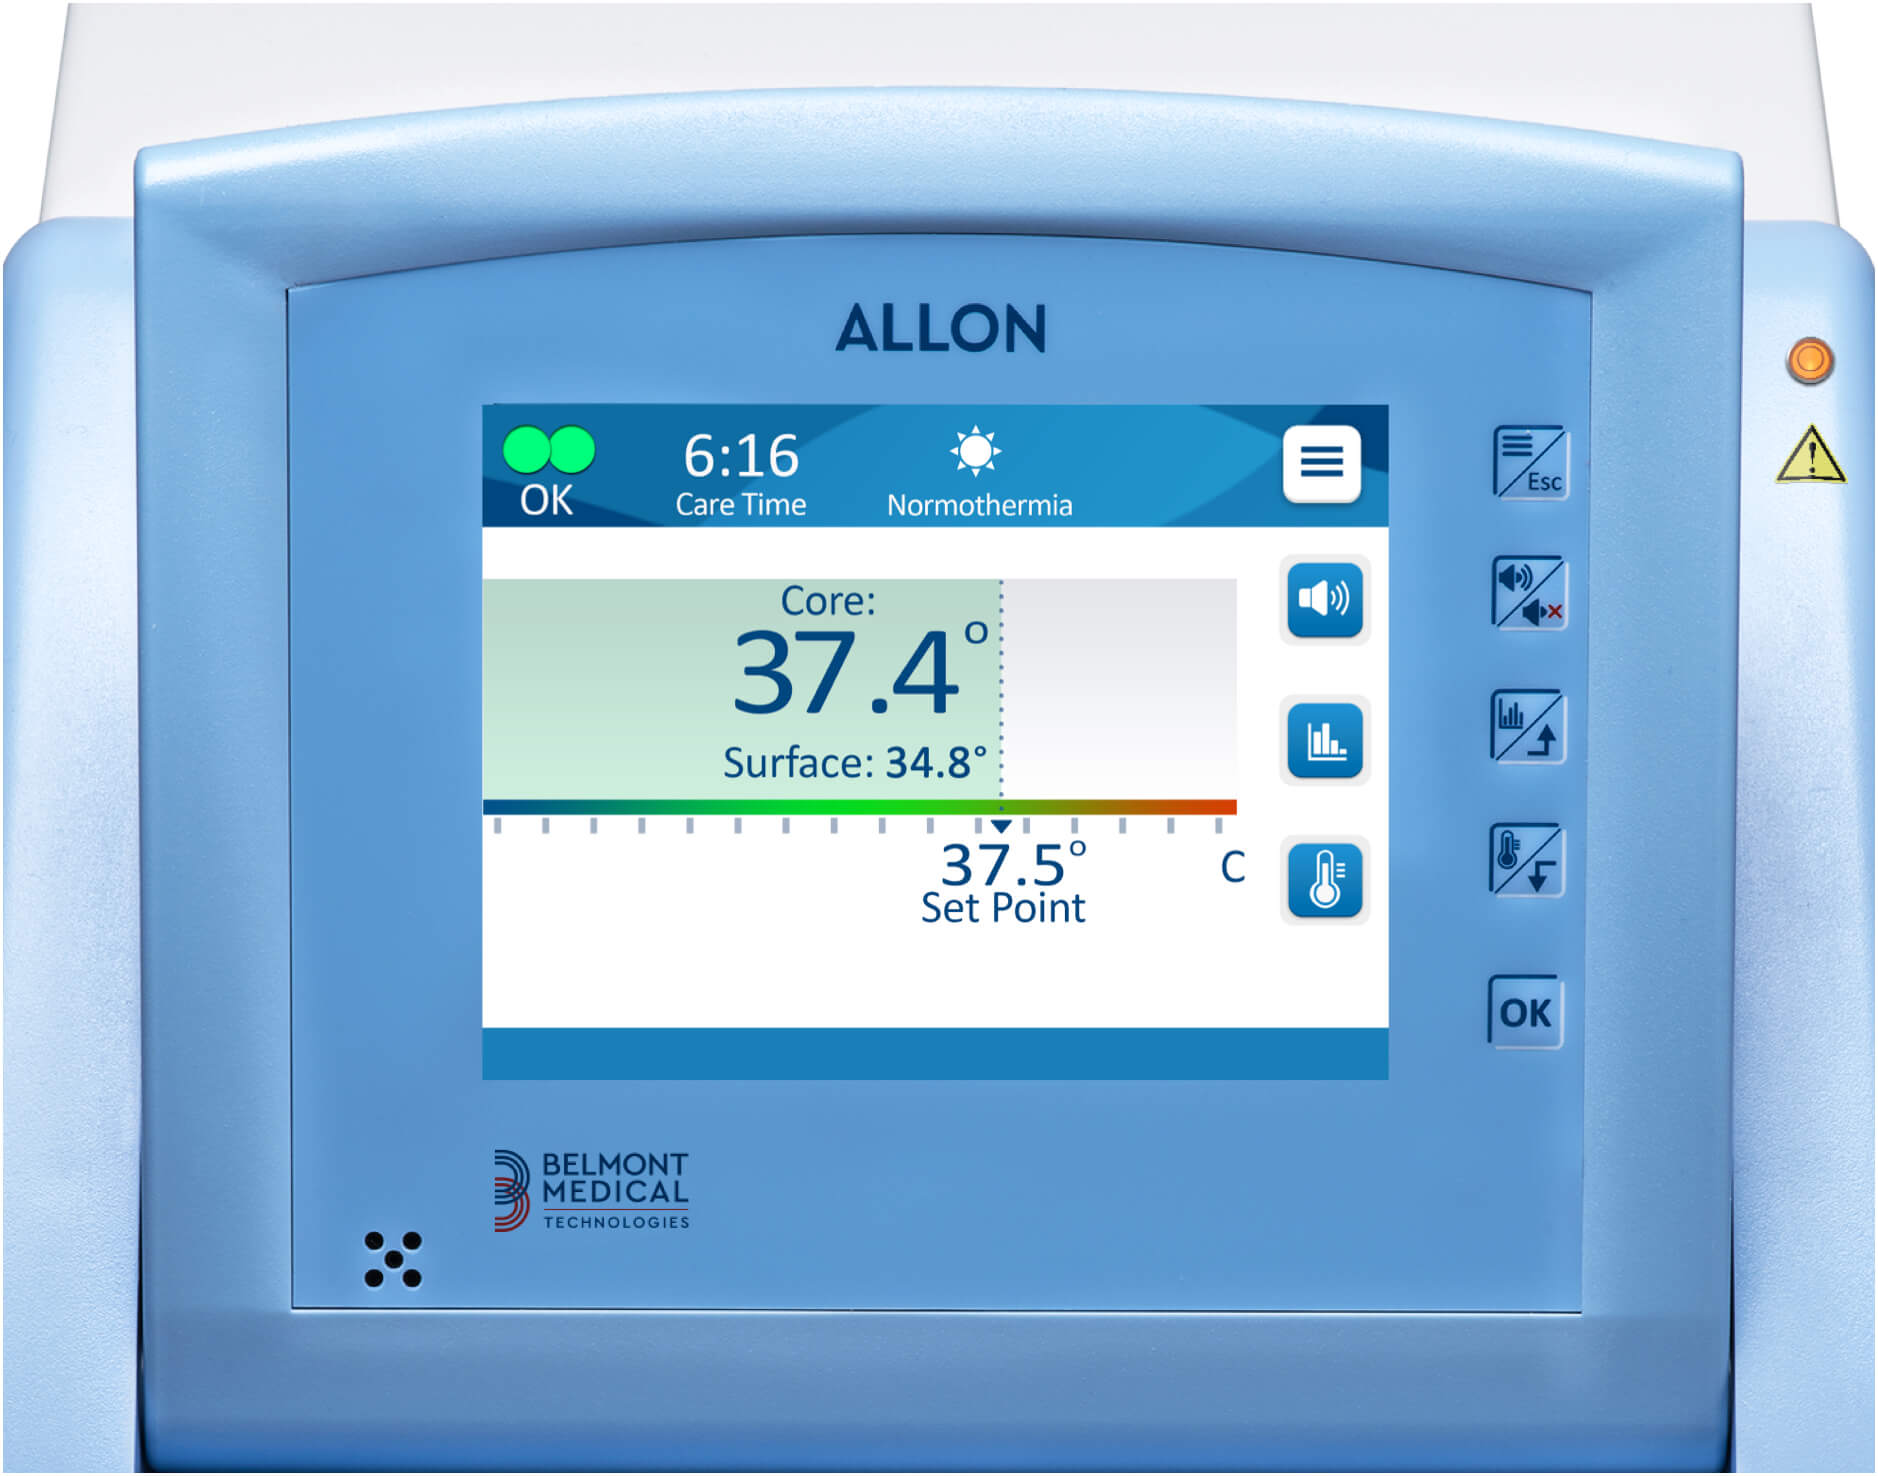 Allon touchscreen showing real time temperature measurements